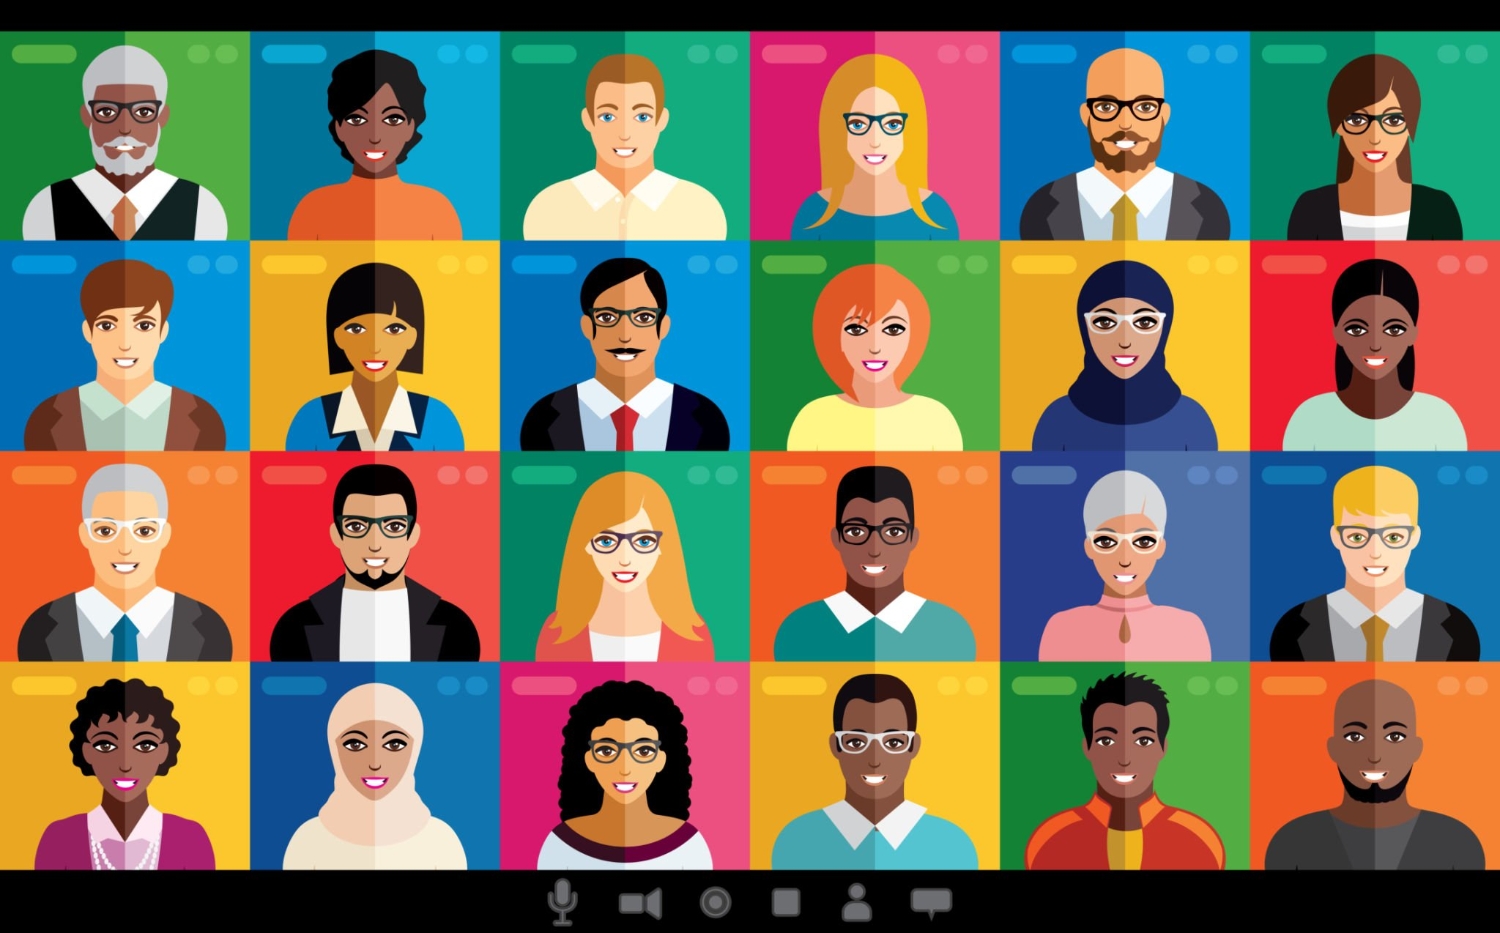 Video conference. Vector illustration of people with different characteristics. Each character is individual. Virtual event